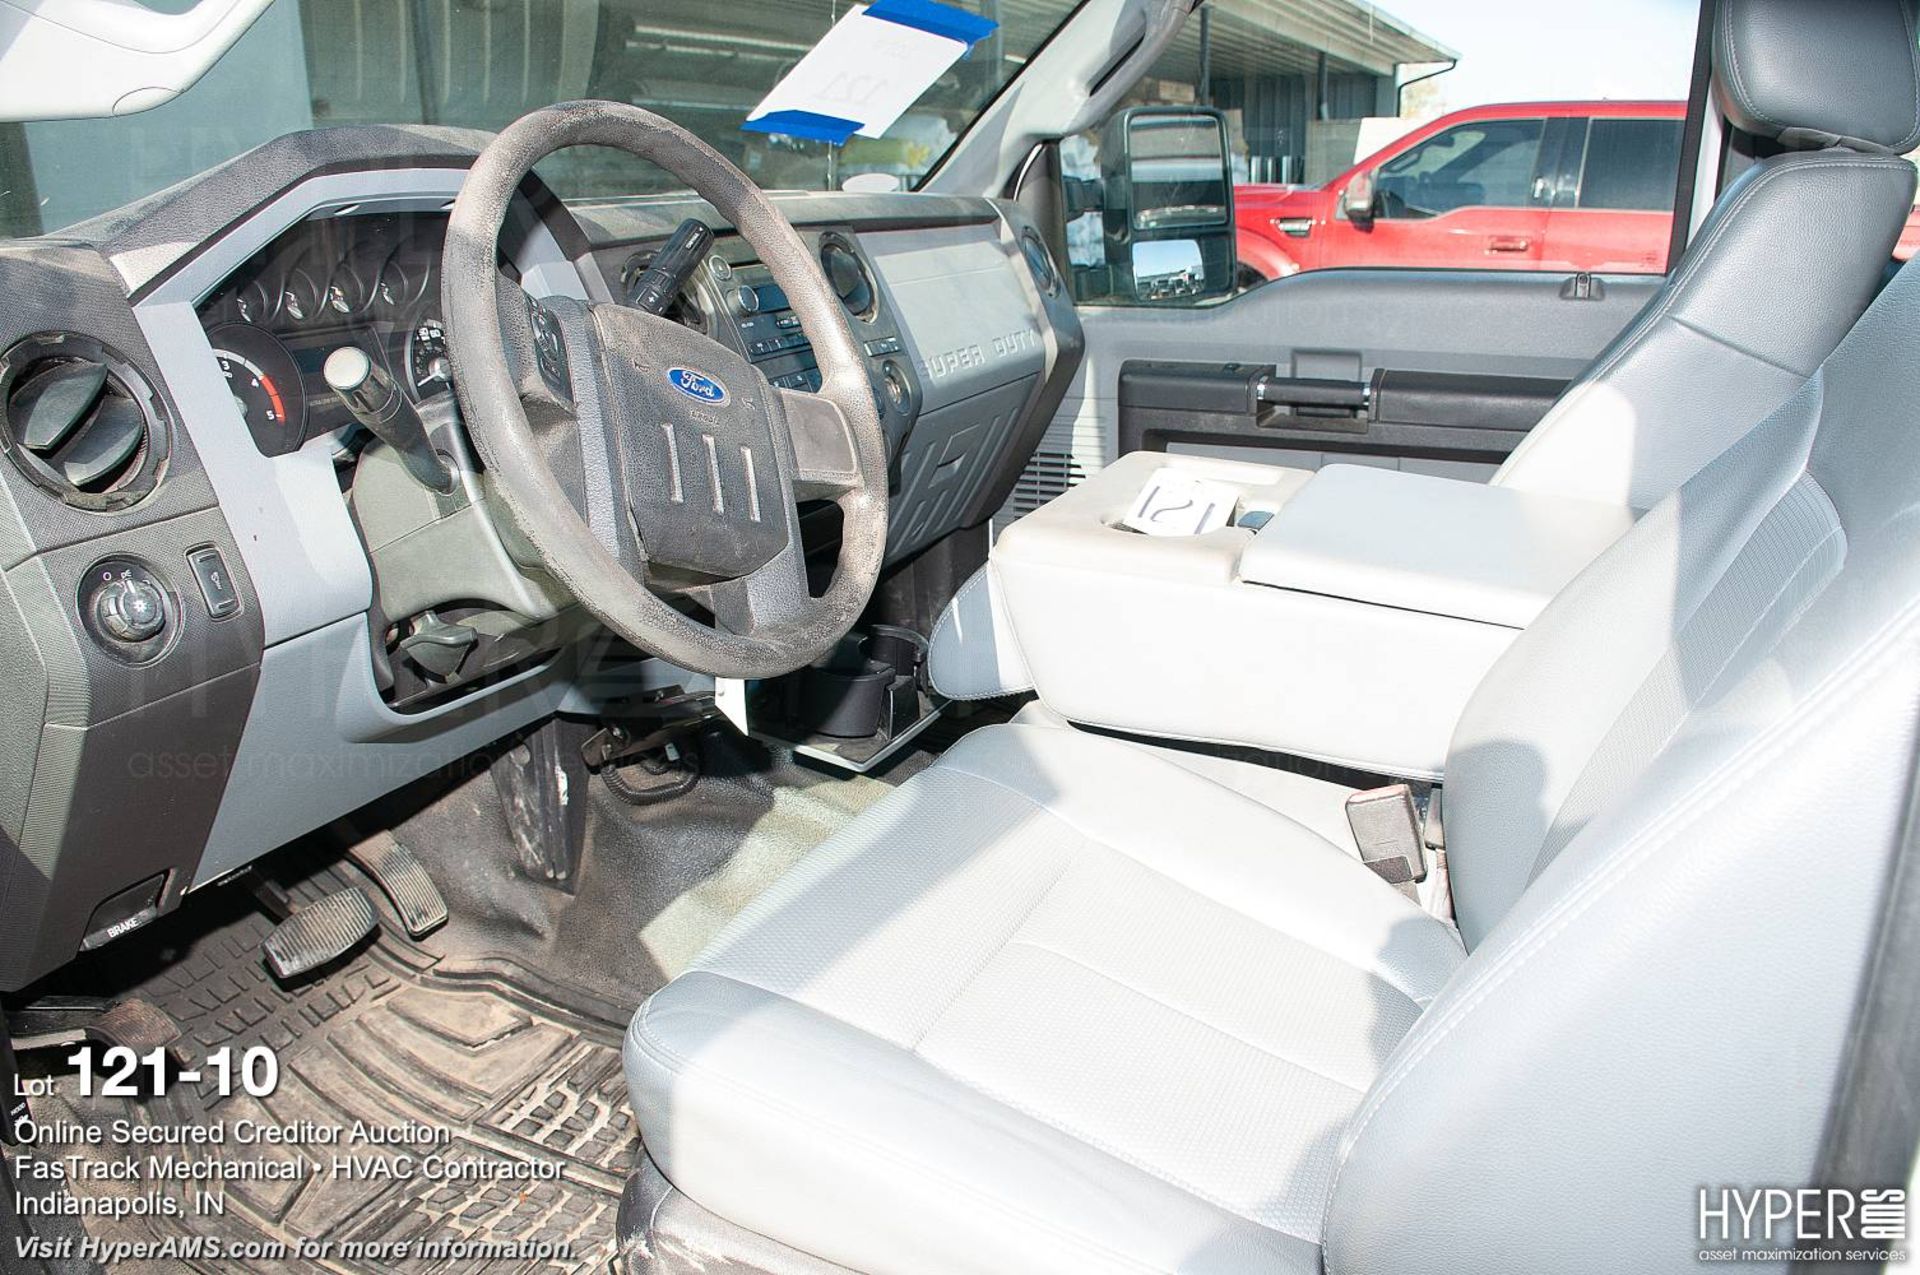 2014 Ford F-250 Super Duty P/U, extended cab - Image 10 of 12